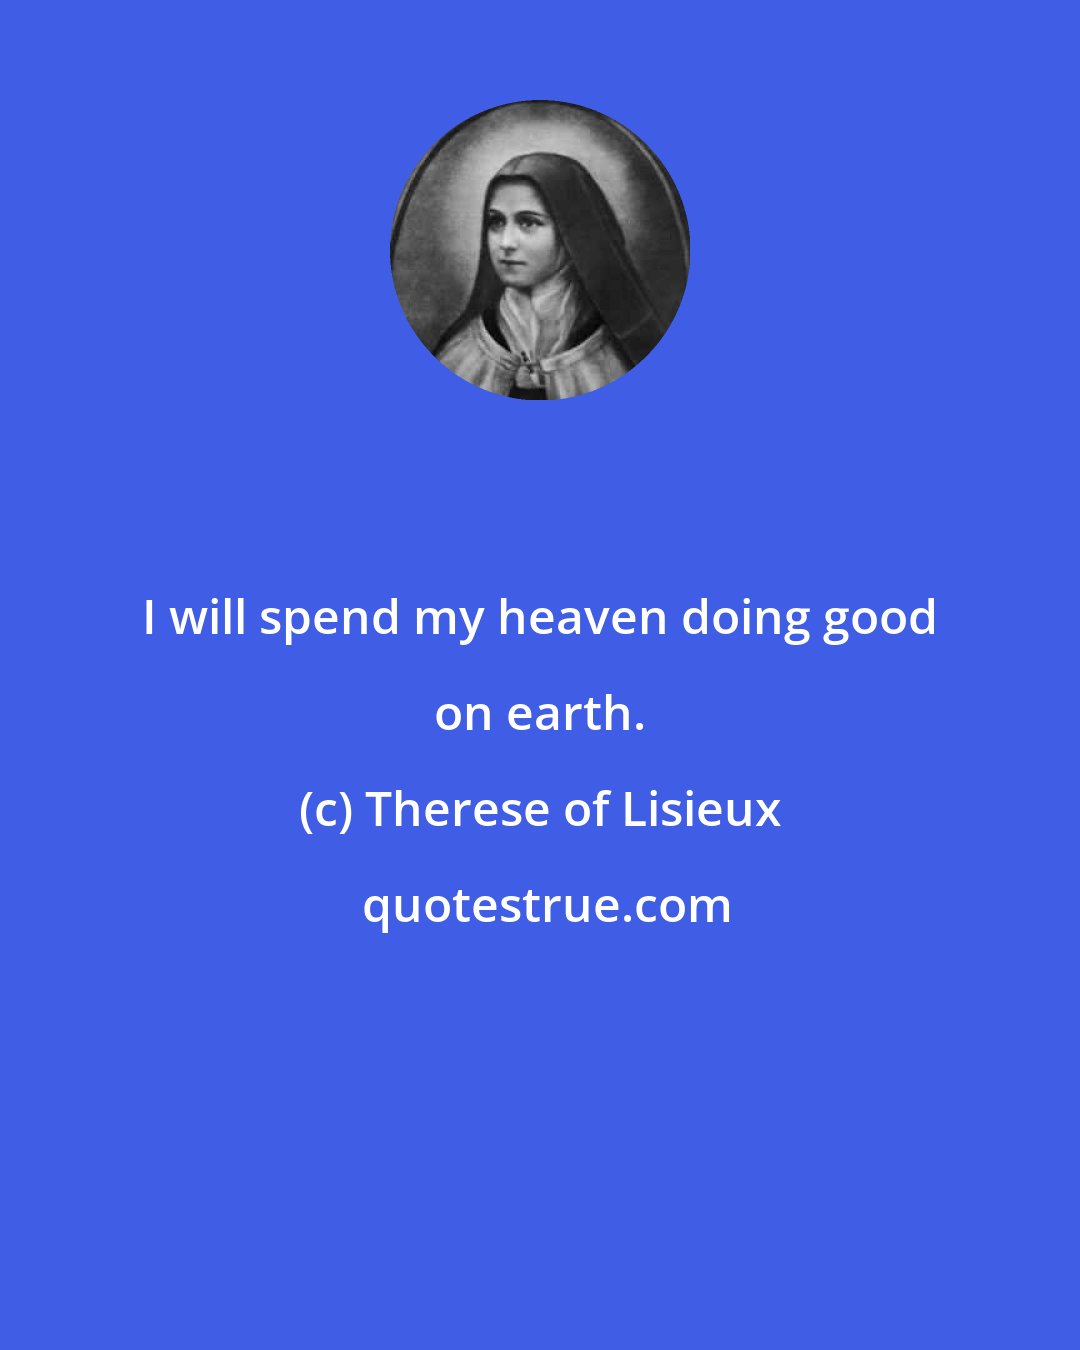 Therese of Lisieux: I will spend my heaven doing good on earth.